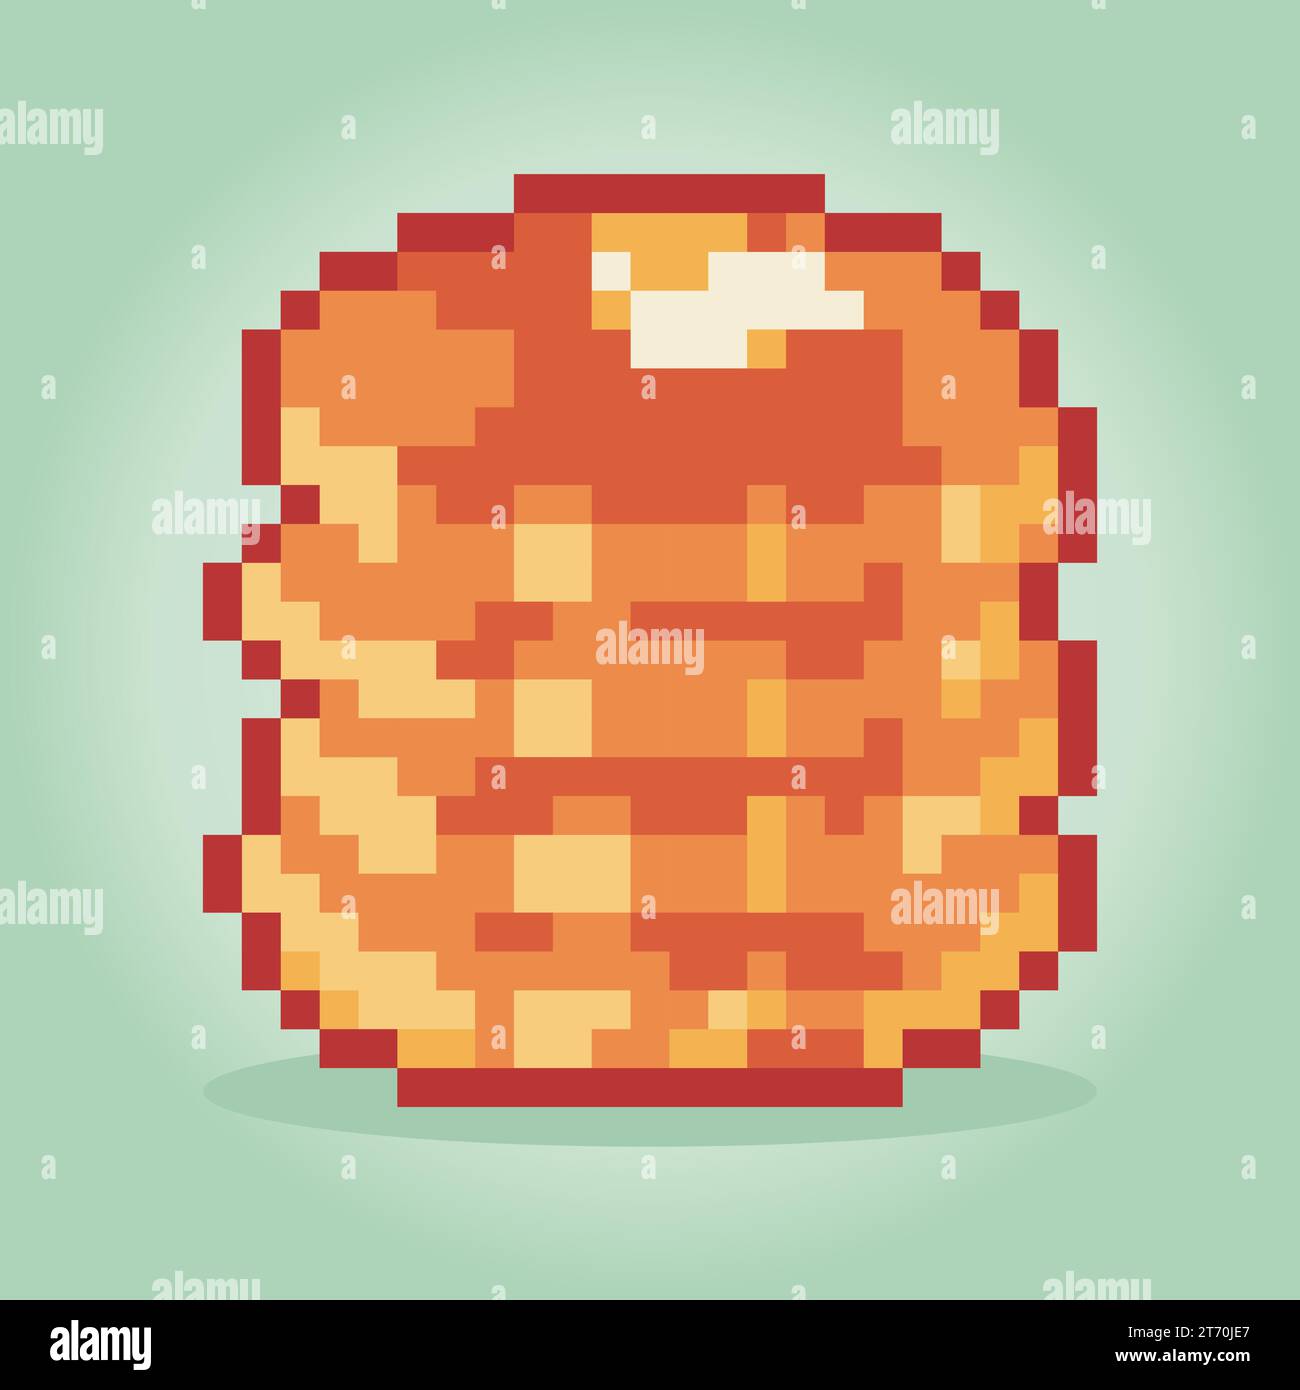 8 bit pixels pancake. Food for game assets and cross stitch patterns in vector illustrations. Stock Vector